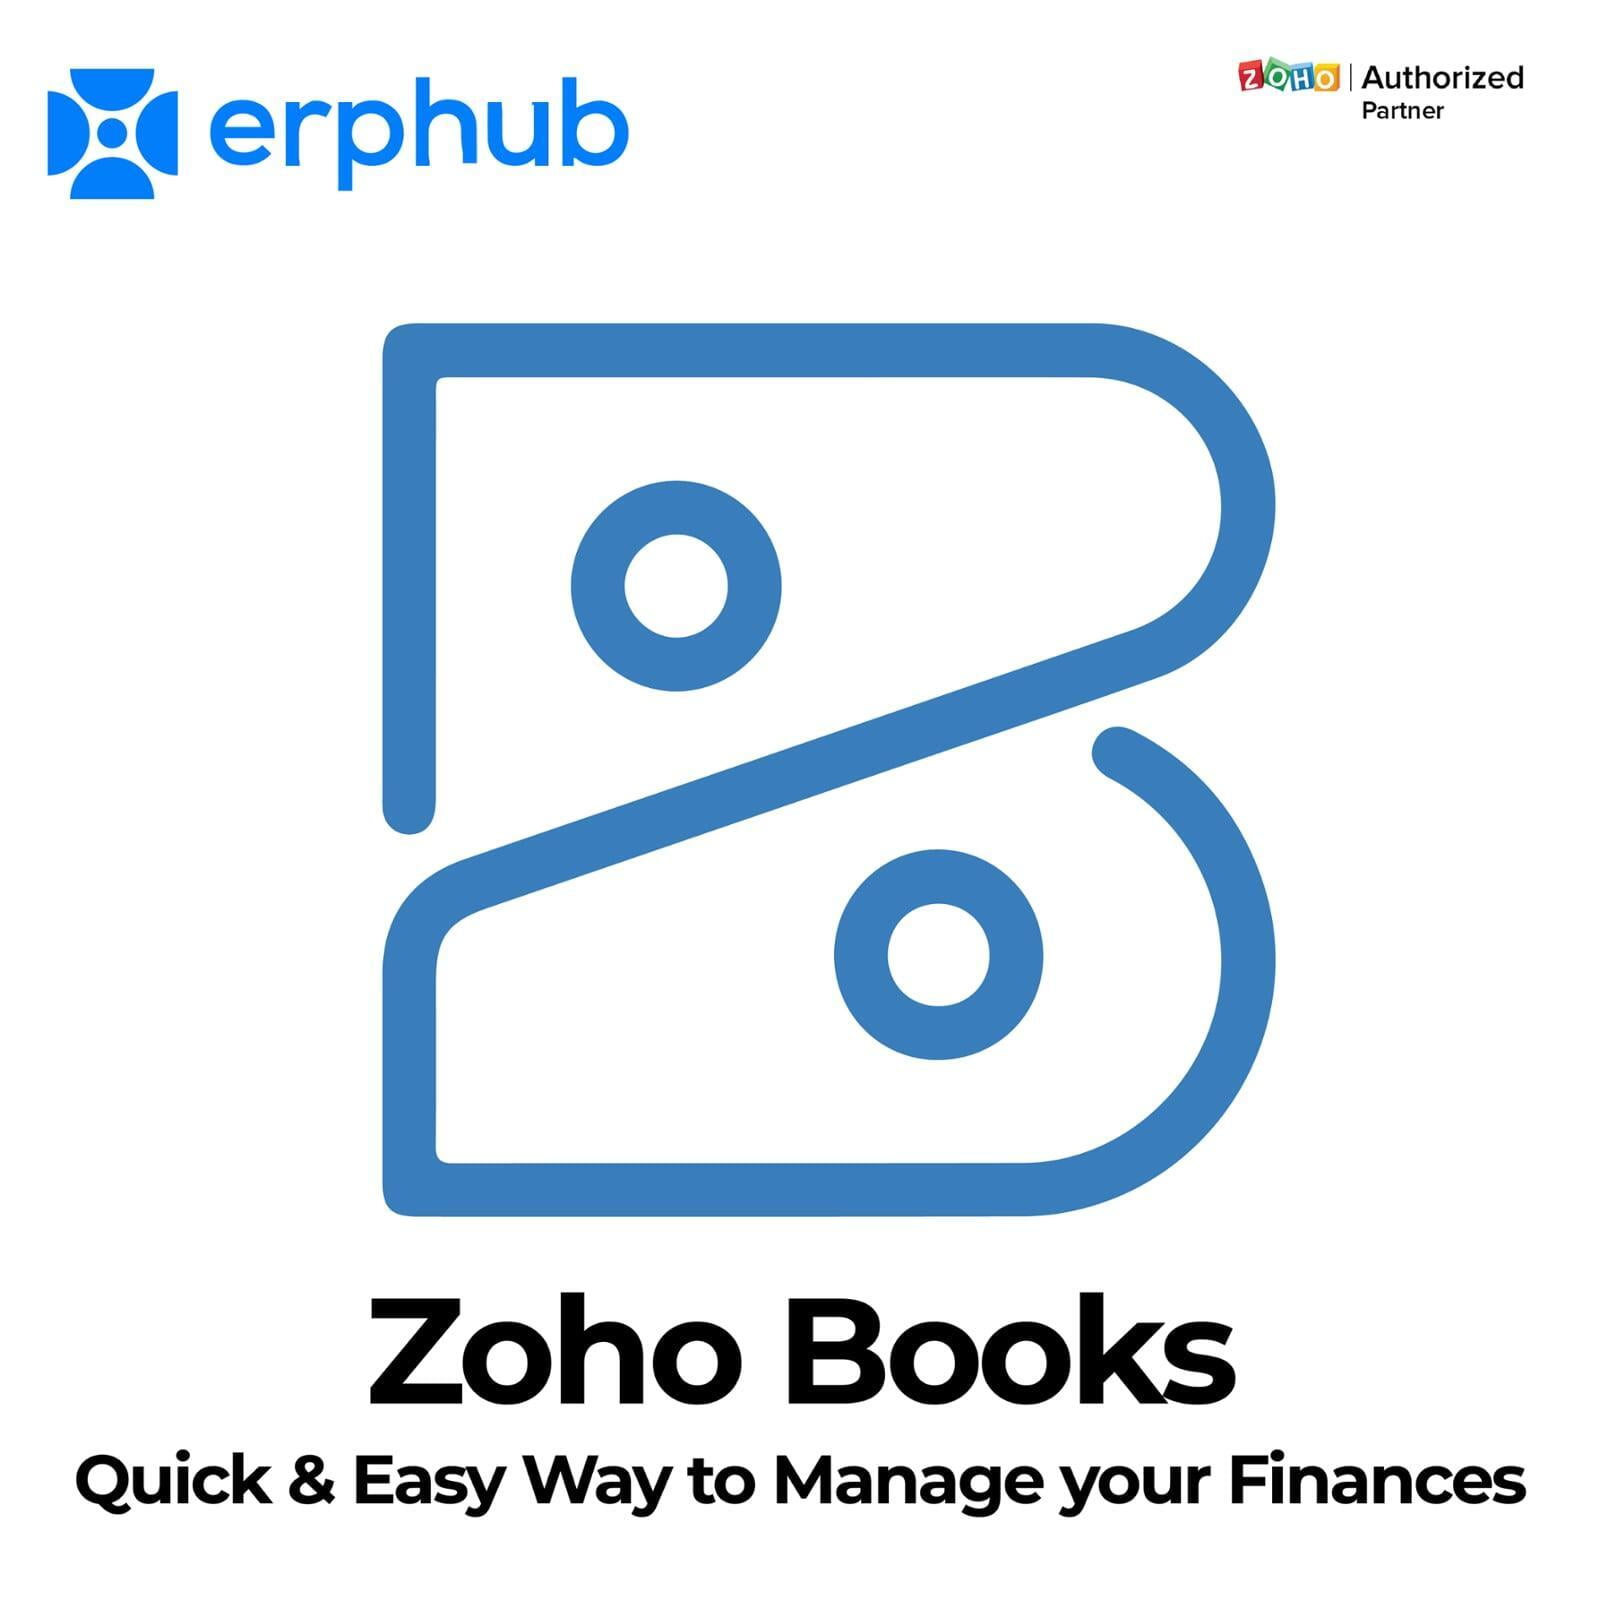 Zoho Books: The Quick and Easy Way to Manage Your Business Finances